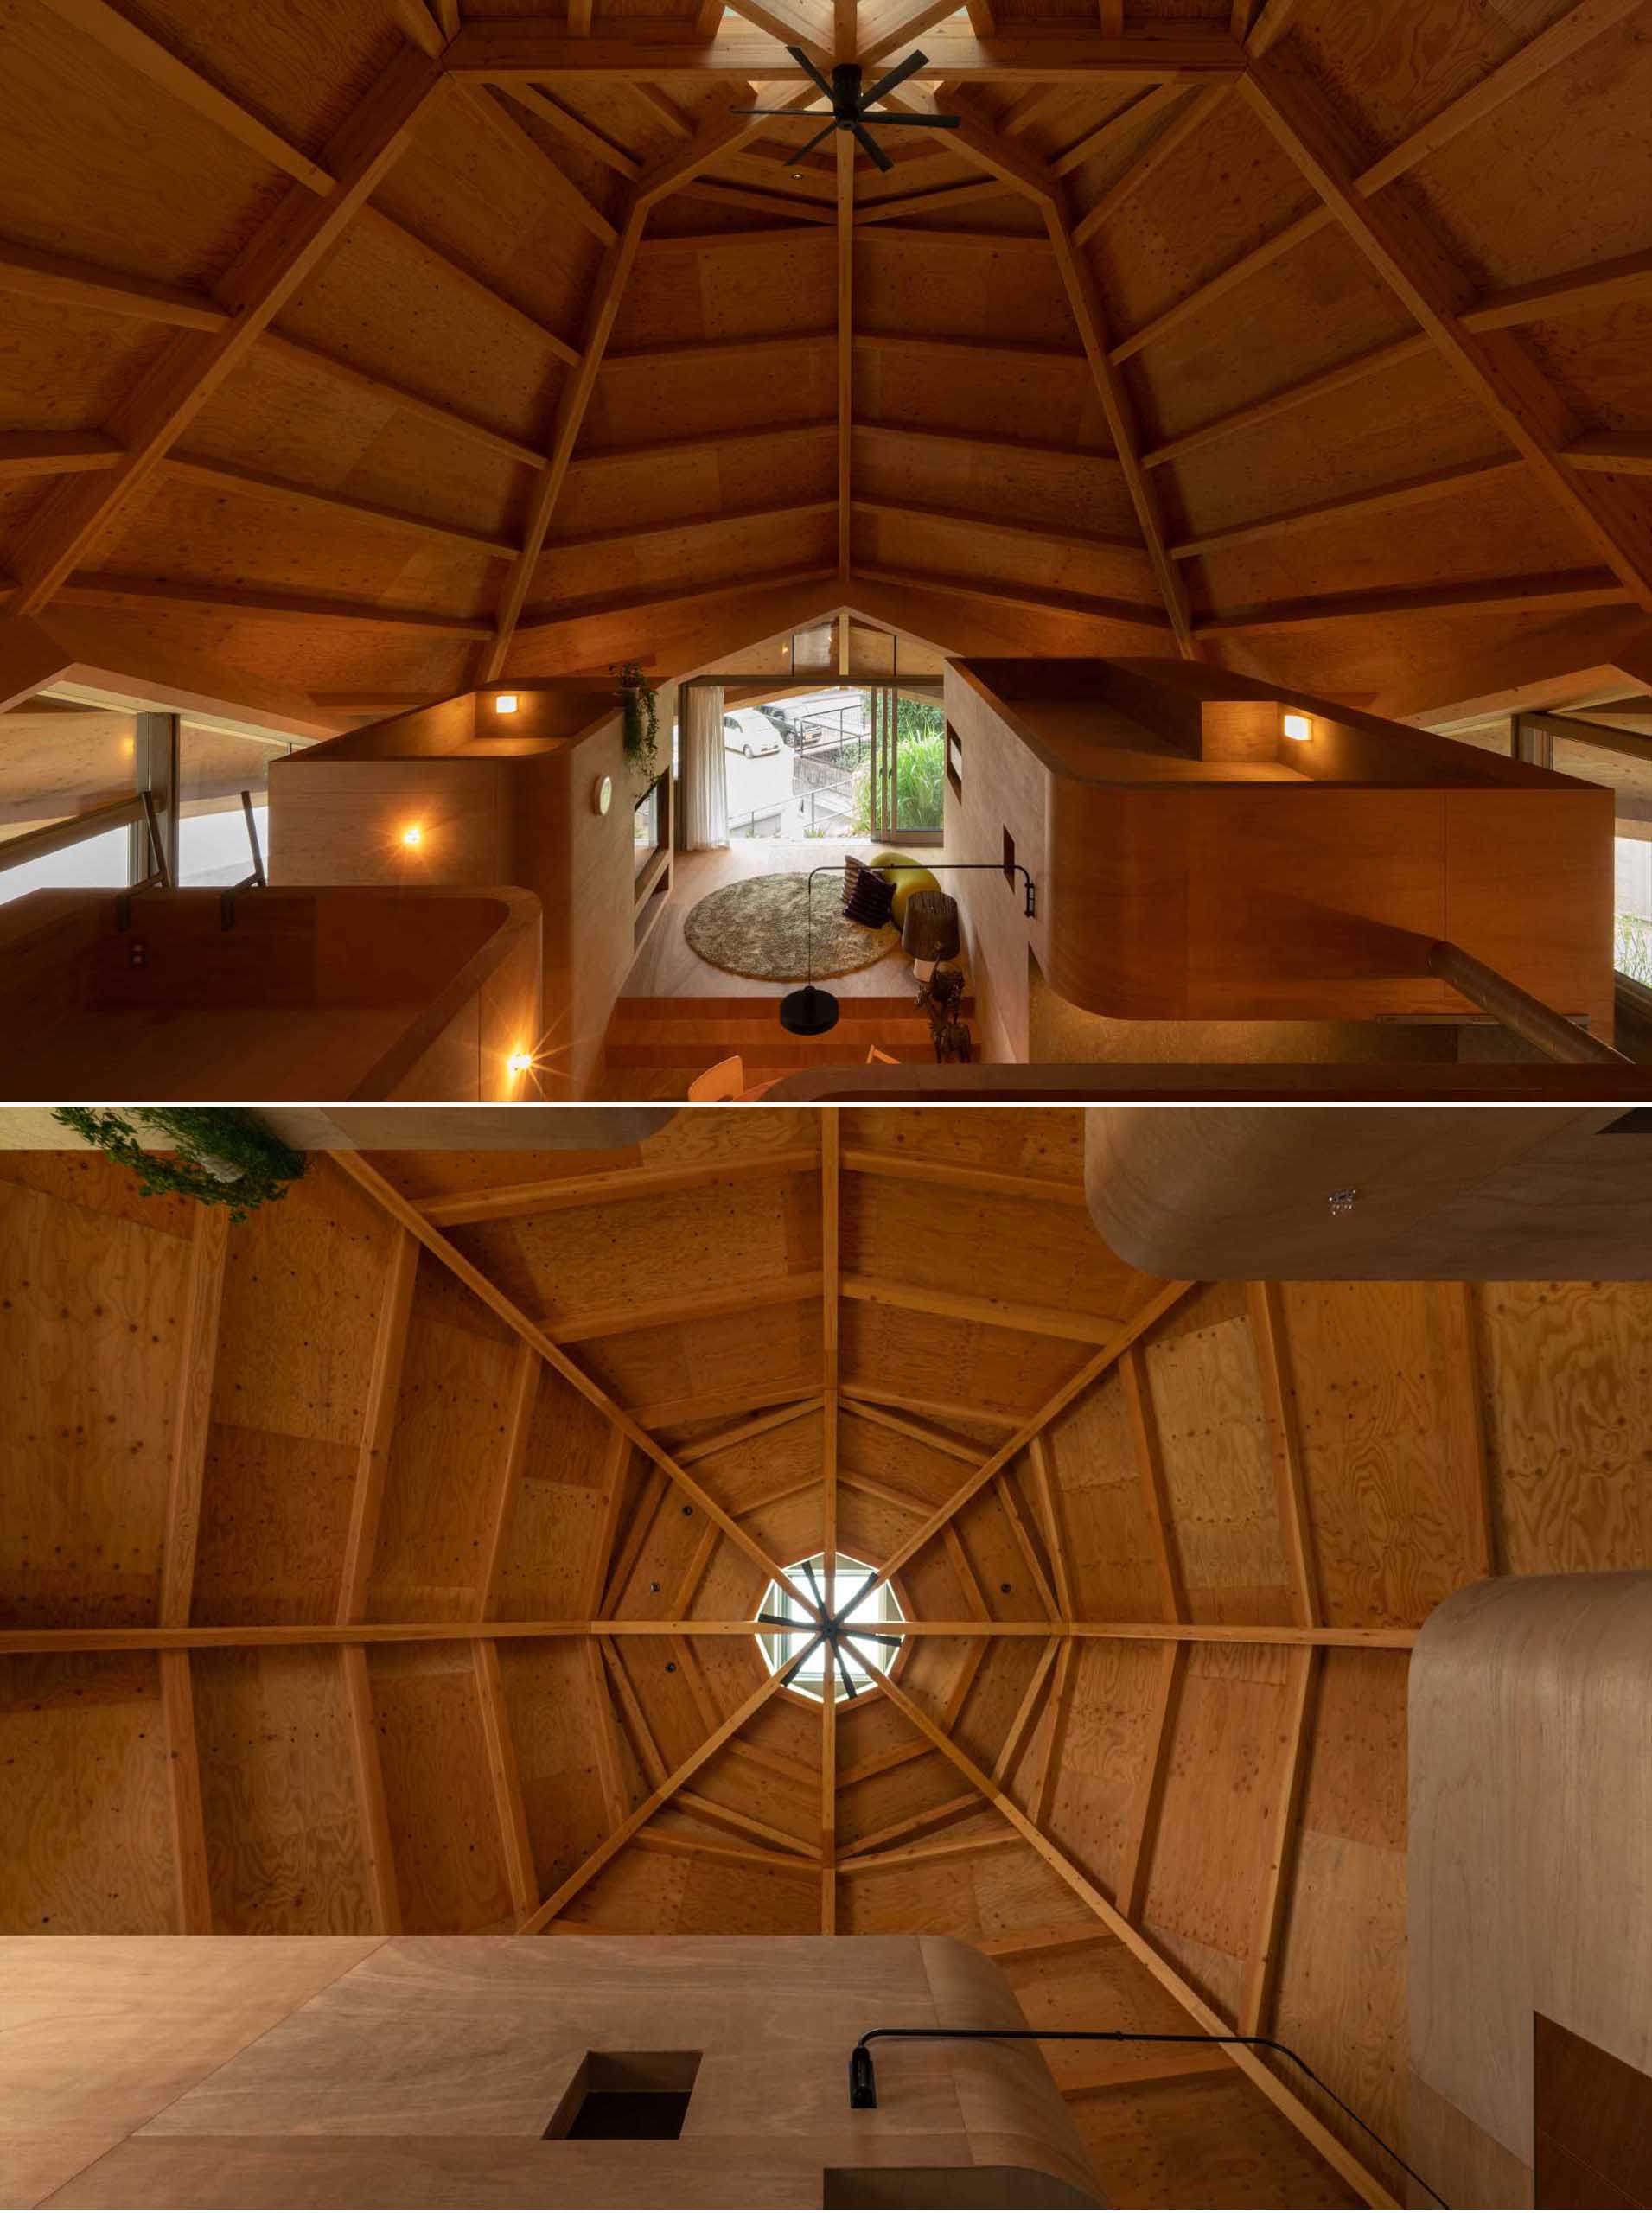 Inside this modern spiderweb-inspired home, you can see the supporting legs that help to create a centripetal single-room space.